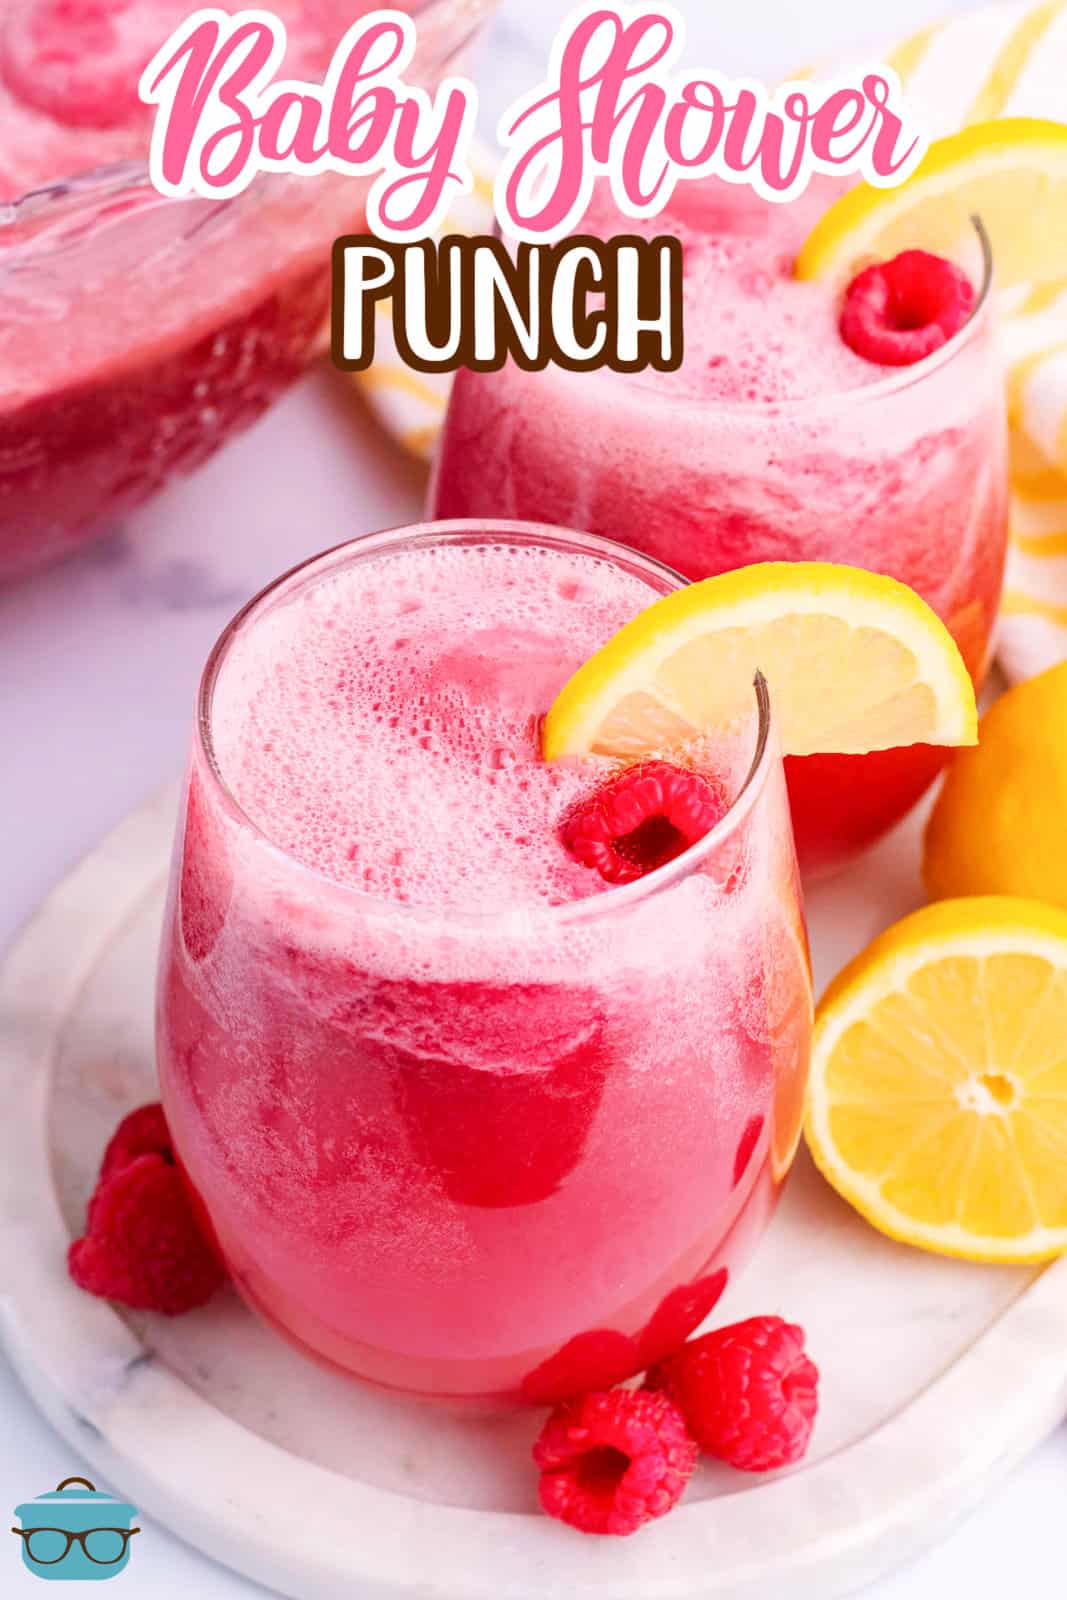 A glass of bright pink Baby Shower Punch with a lemon wedge.